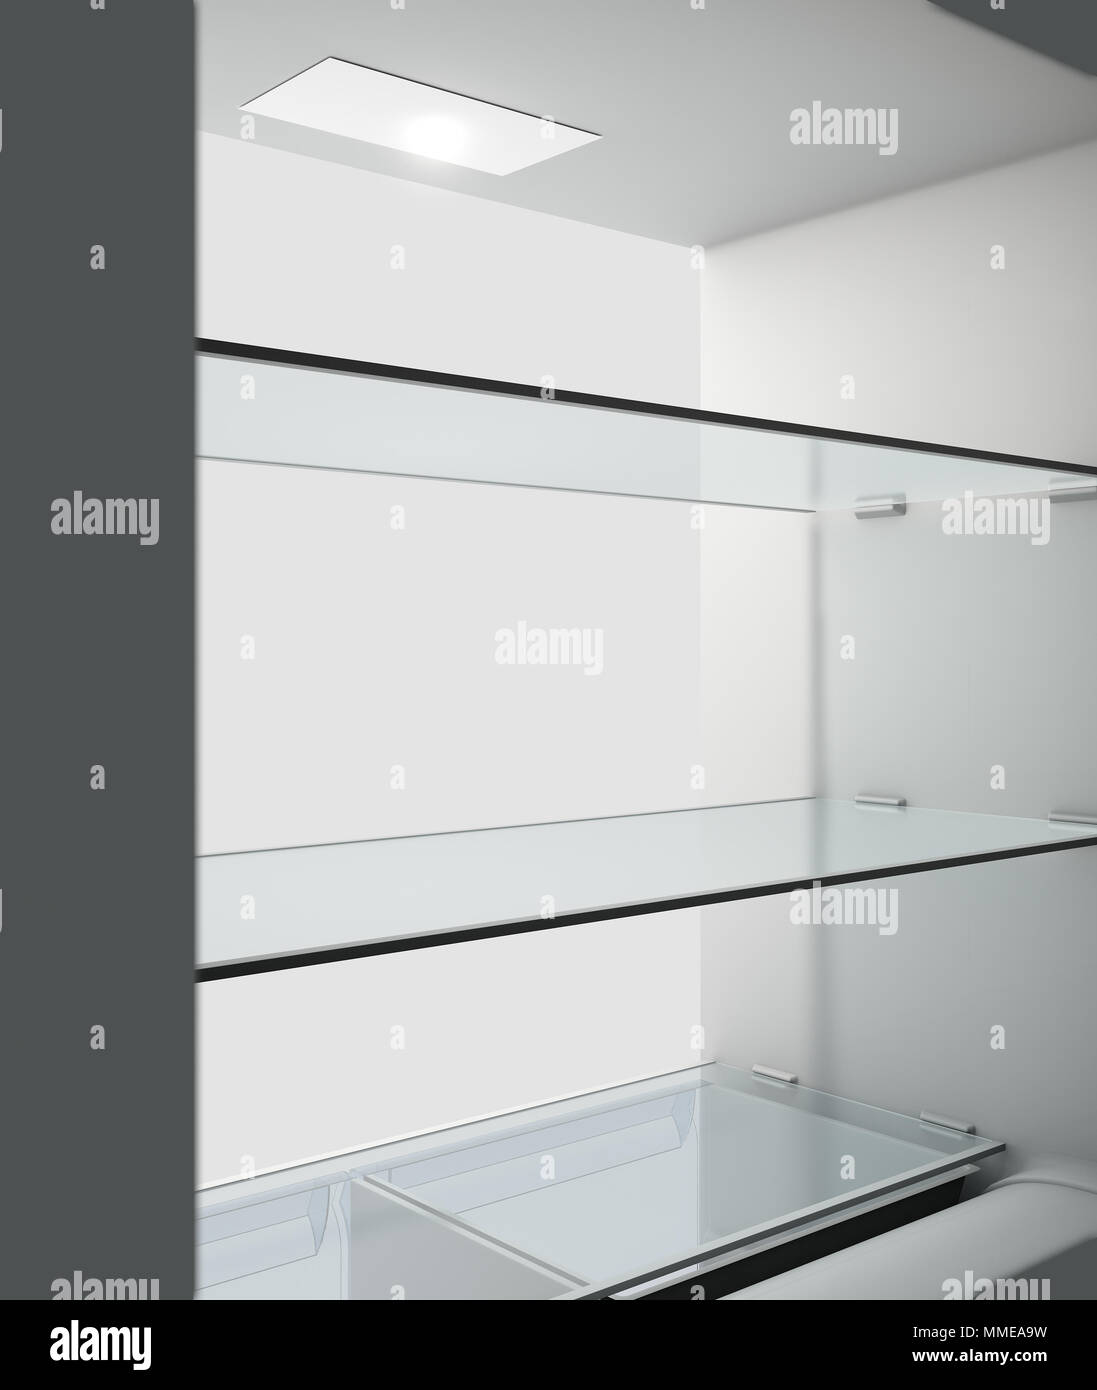 A view from inside an empty household fridge or freezer looking out the open door - 3D render Stock Photo